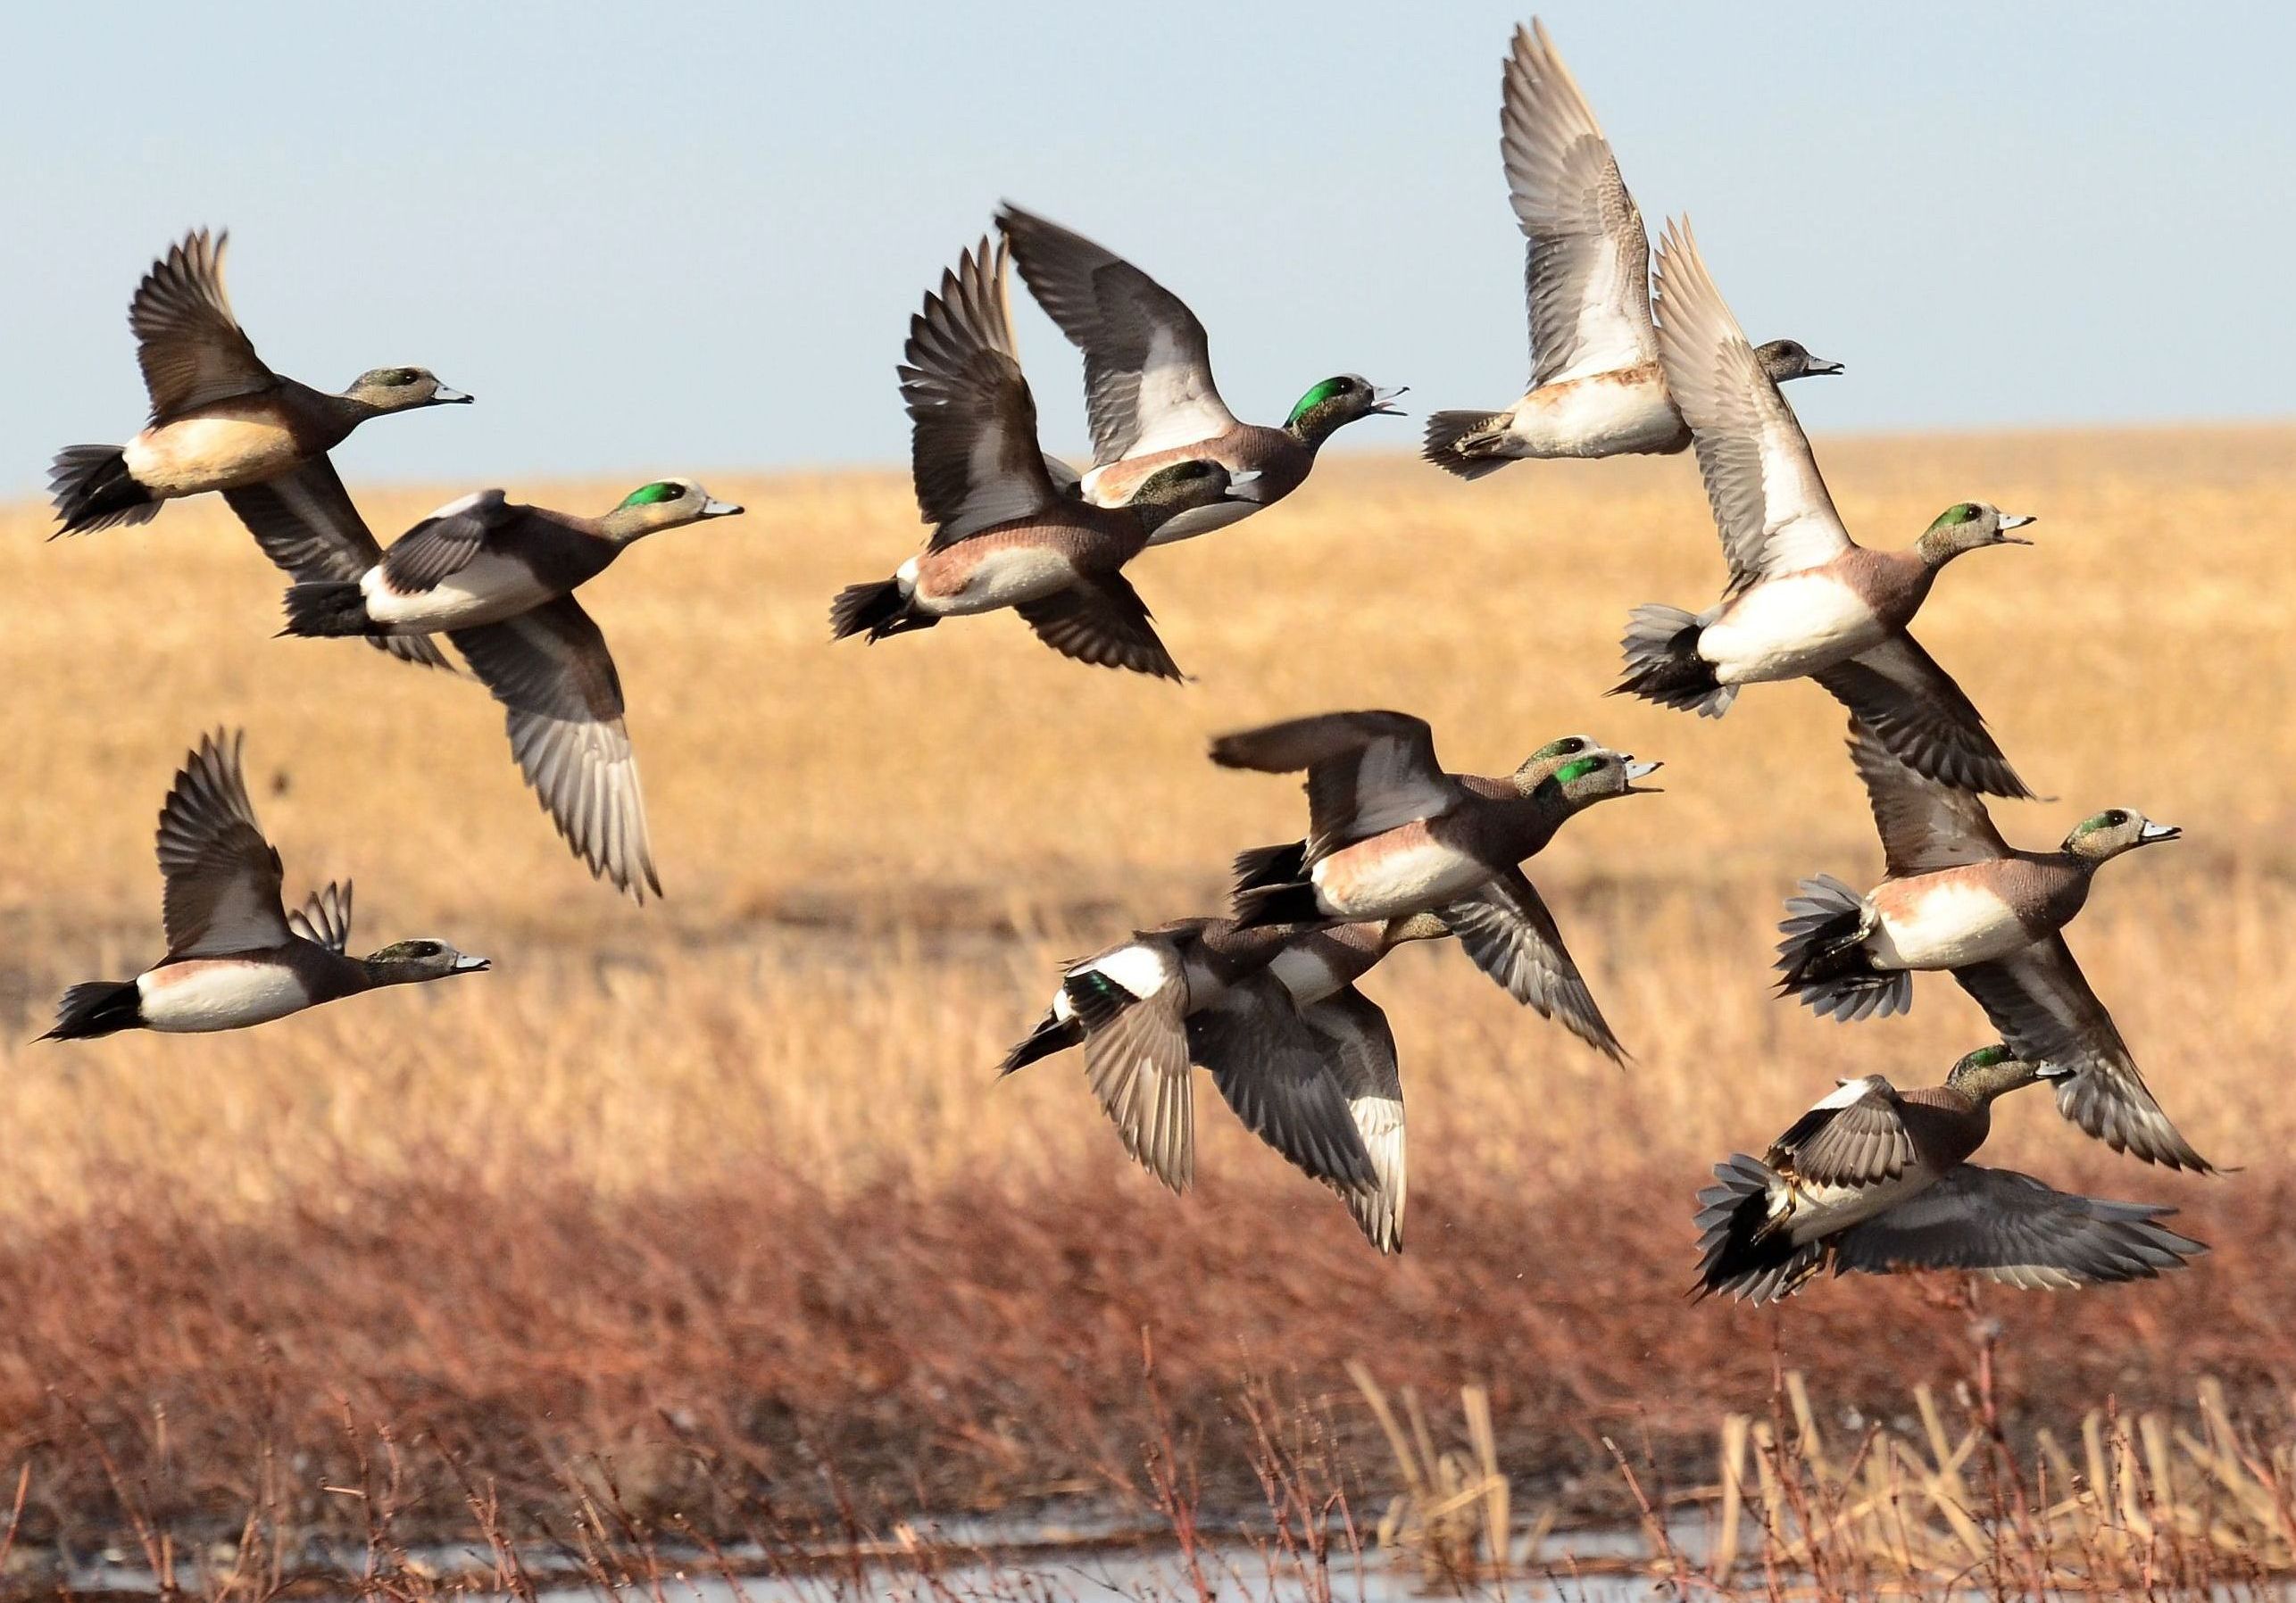 A dozen brown, gray and white ducks flying low over brown grassland with water running through it